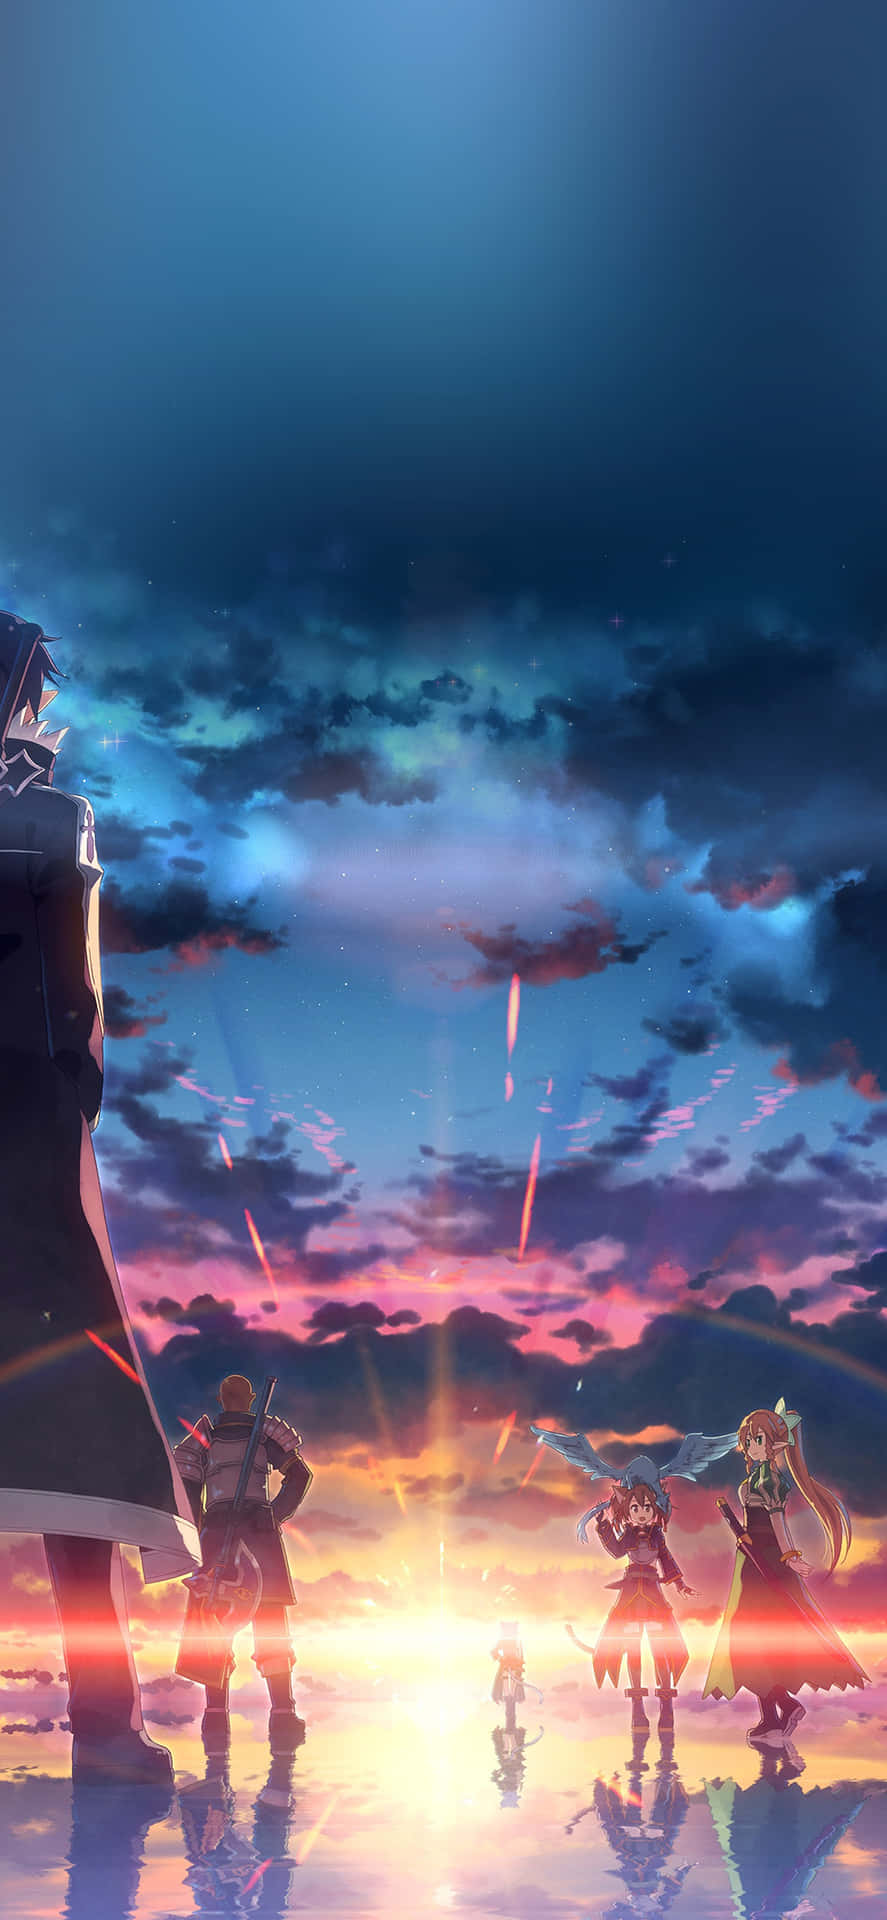 Feel The Serenity Of The Anime Sunset